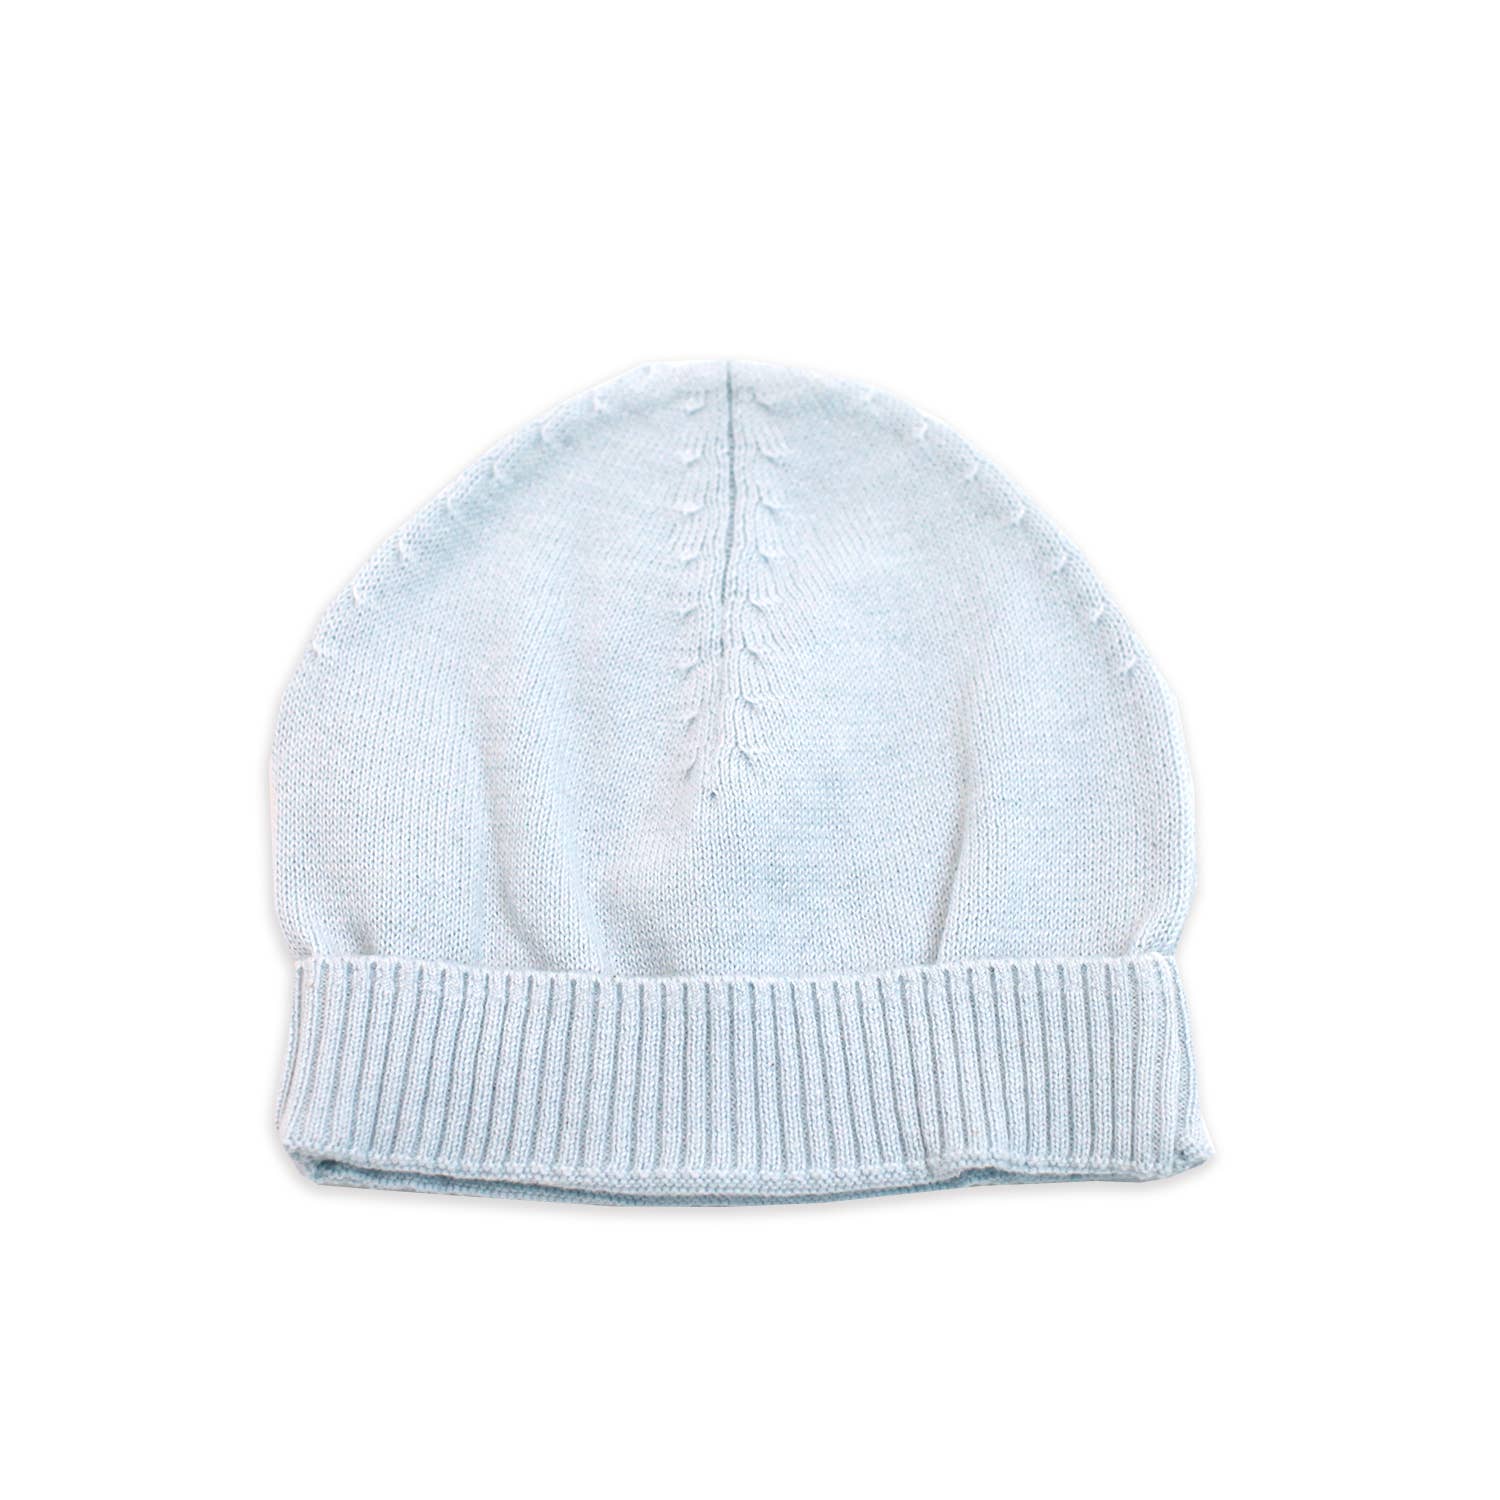 Indulge your little one in the ultimate comfort and cuteness with our Milan Round Hat Baby Beanie! Made from ultra-soft, 100% organic cotton, this sweater knit beanie will keep them warm and cozy all year long. With a meticulous design and lightweight feel, it's perfect for any season.  Ethically produced in India, supporting better livelihoods for small grower farmers.